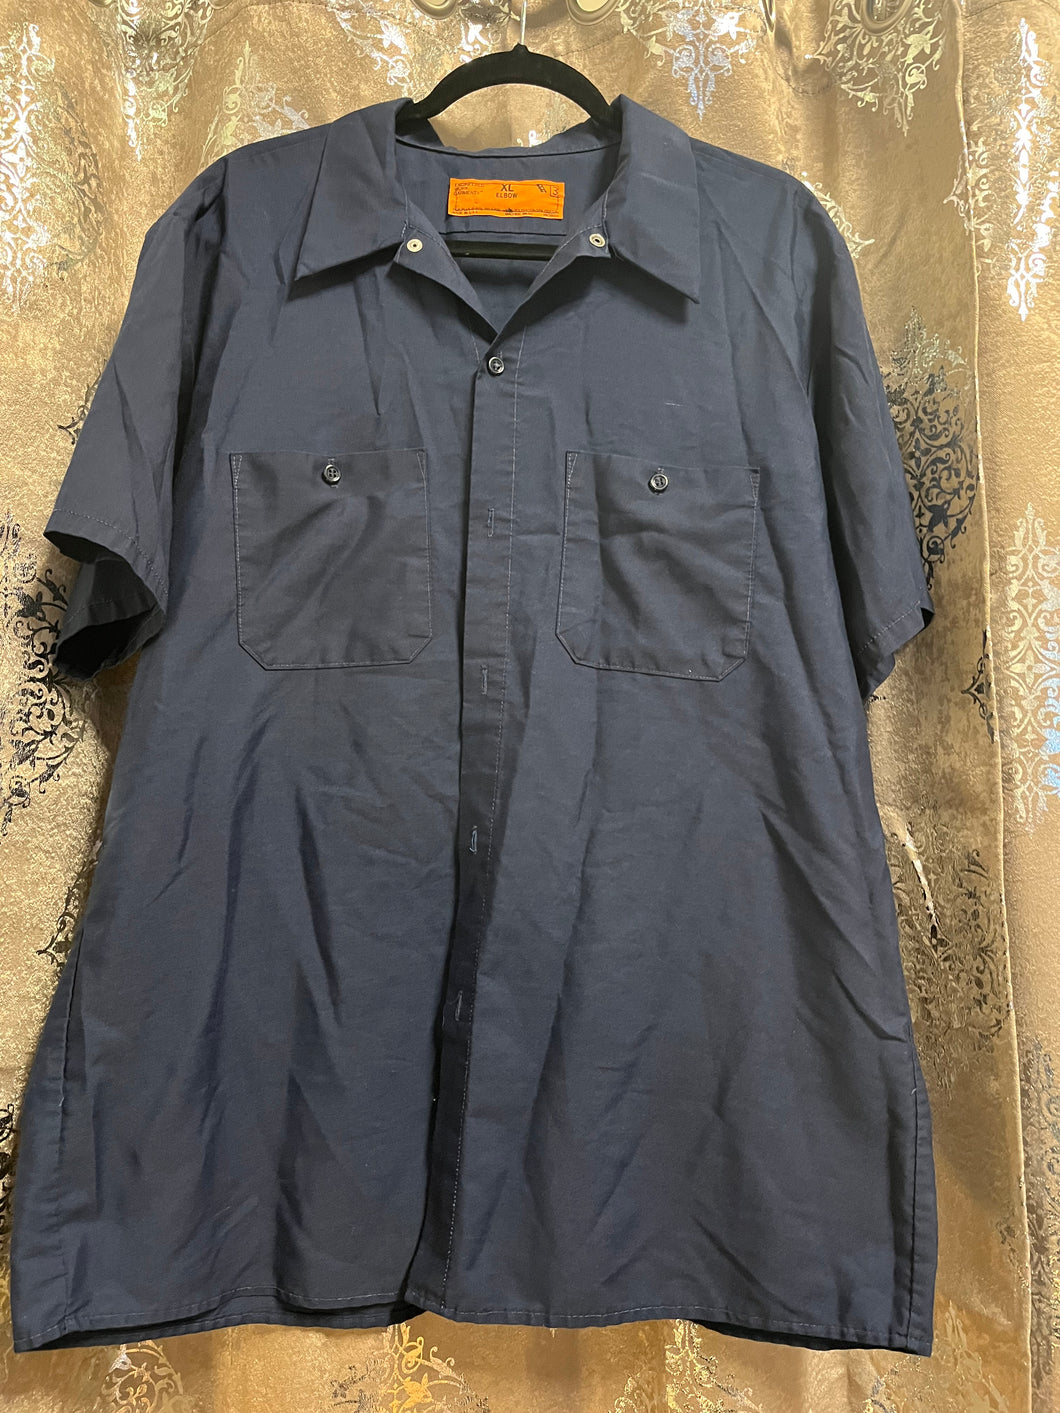 Workers Shirt, size XL